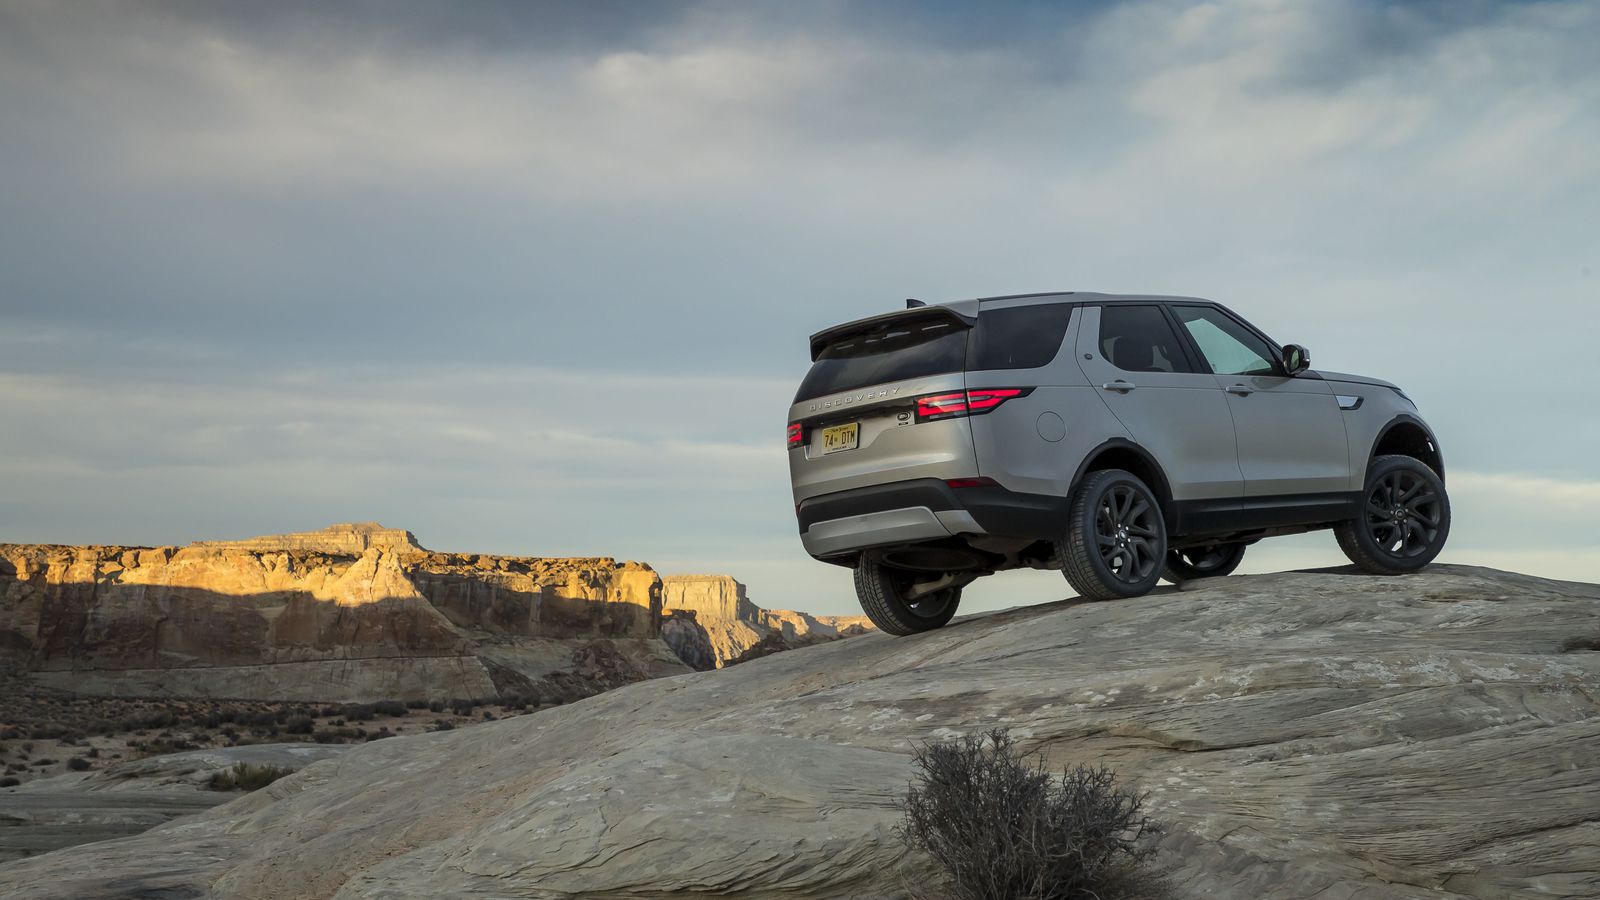 Nice Images Collection: Land Rover Discovery Desktop Wallpapers